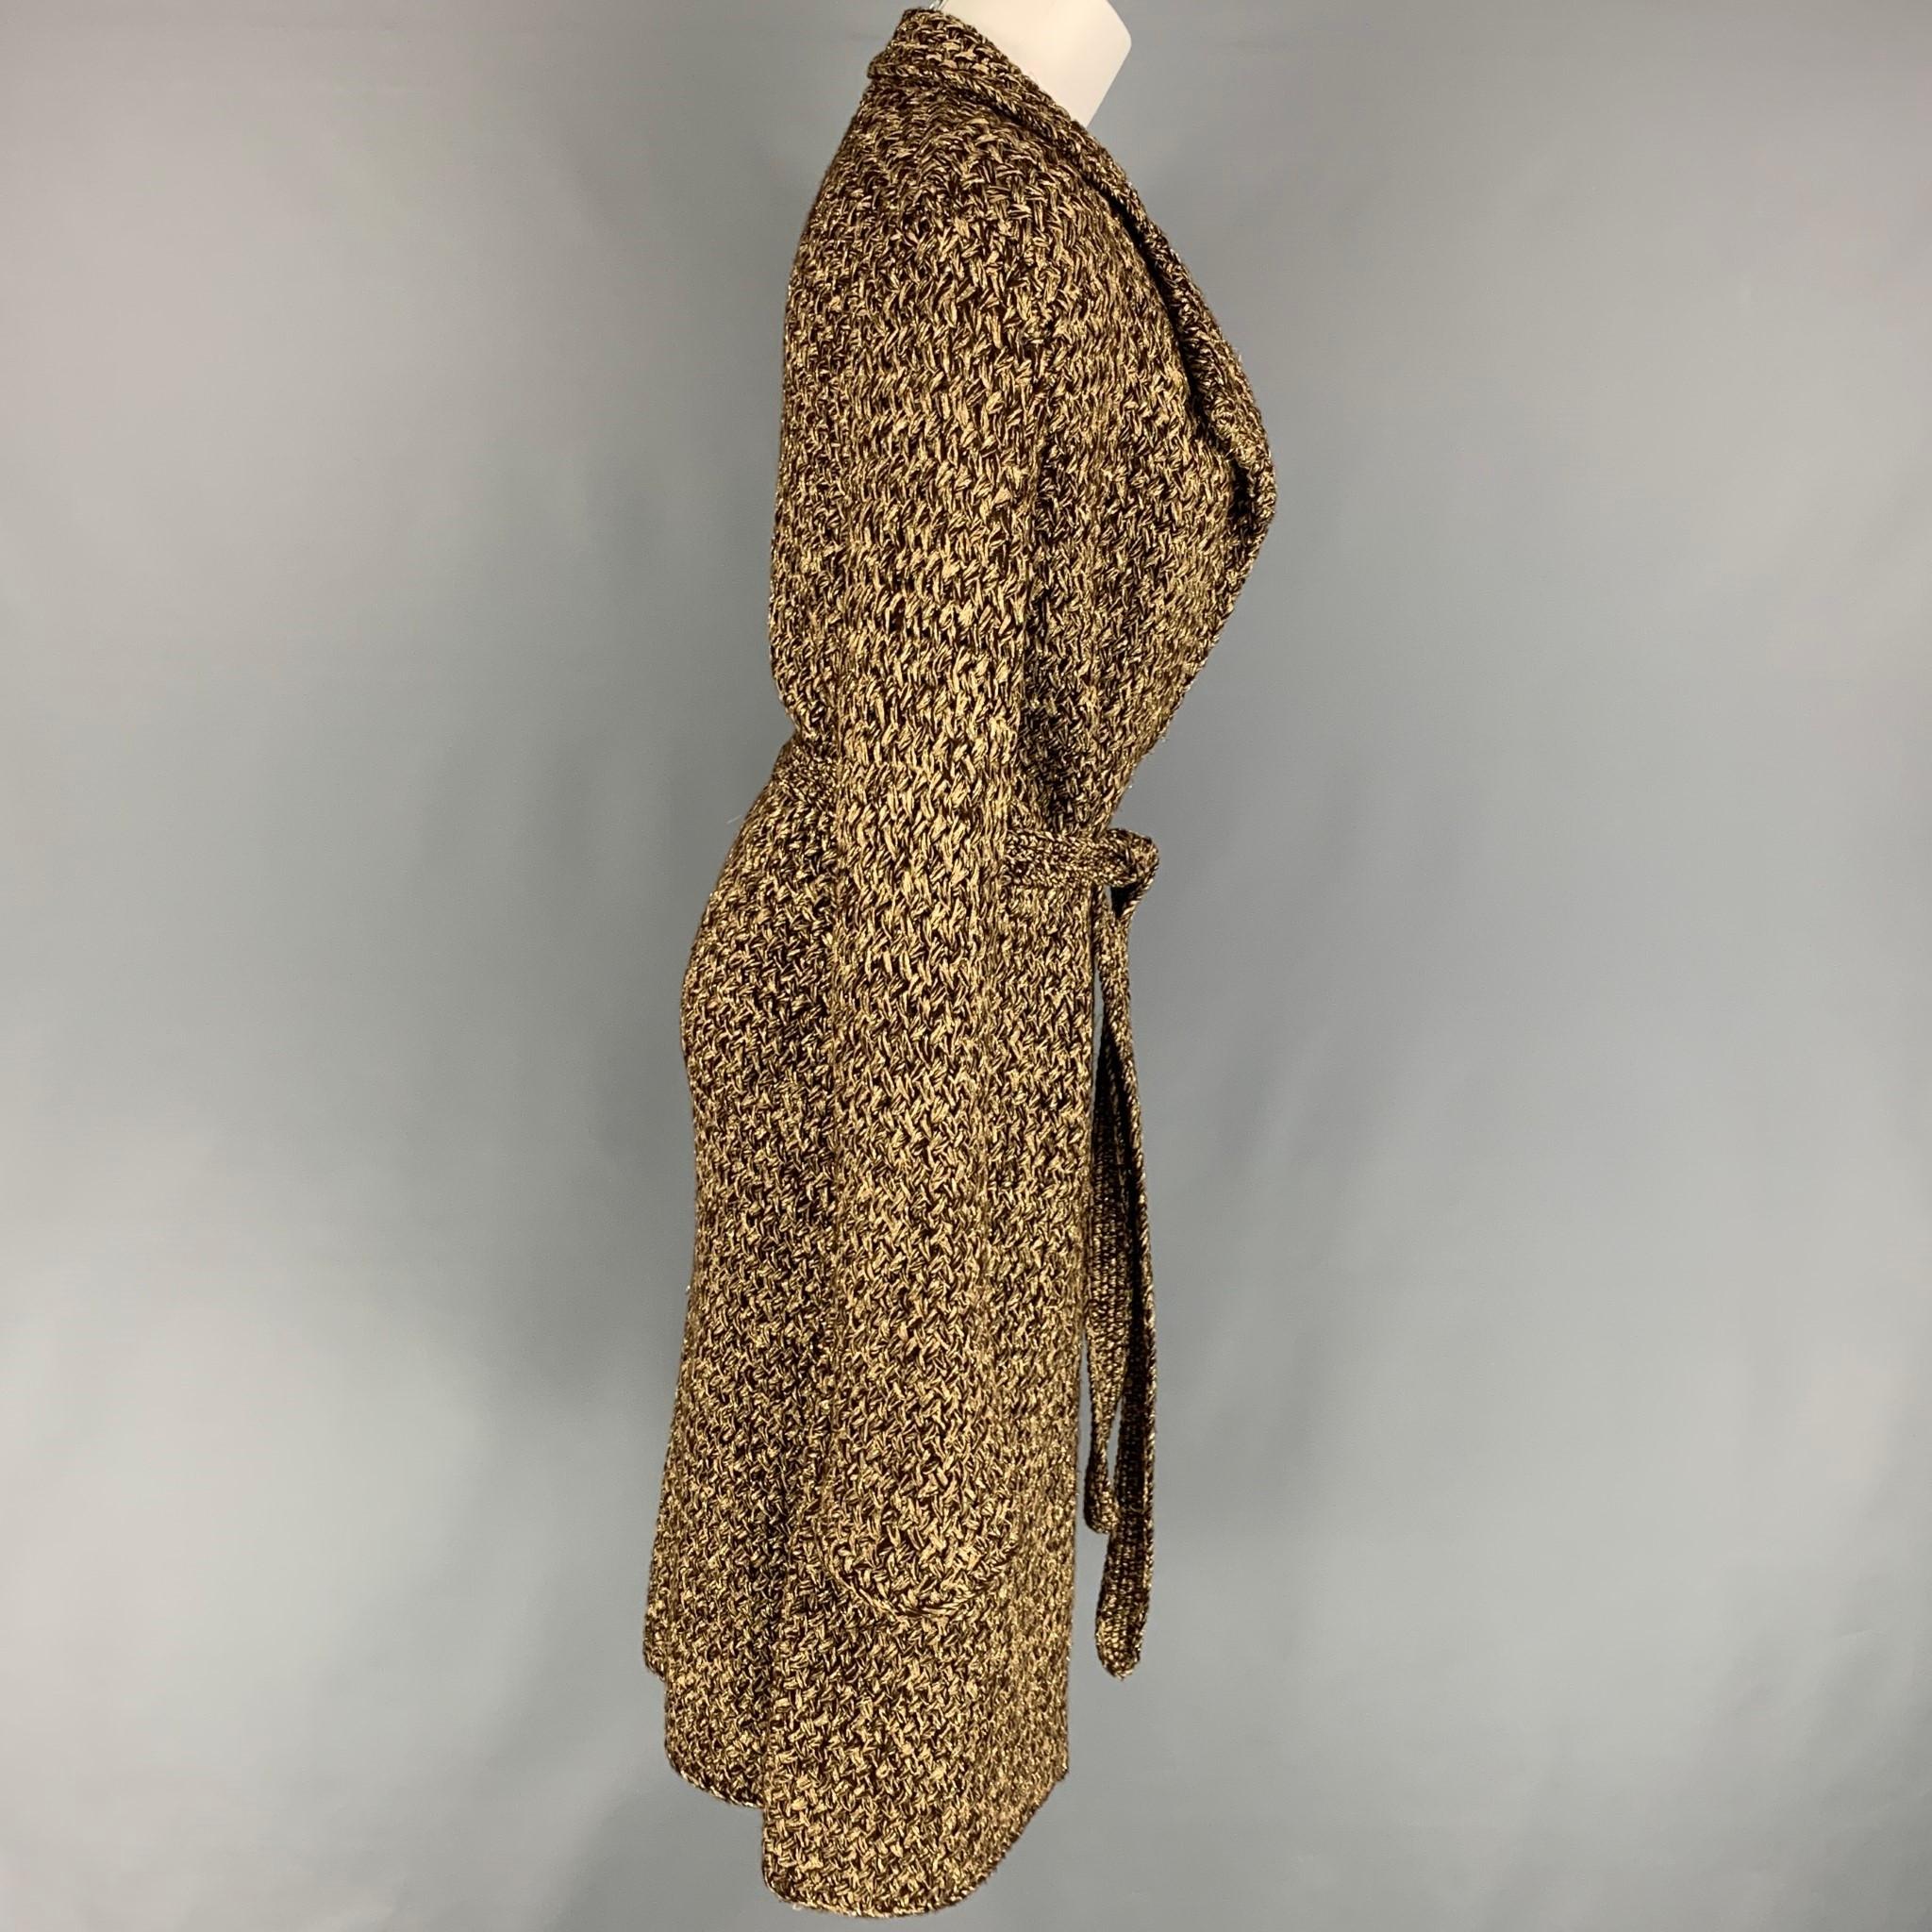 RALPH LAUREN 'Purple Label' coat comes in a brown & gold woven cashmere blend featuring a notch lapel, belted detail, and a open front. 

Very Good Pre-Owned Condition.
Marked: M
Original Retail Price: $3,990.00

Measurements:

Shoulder: 14